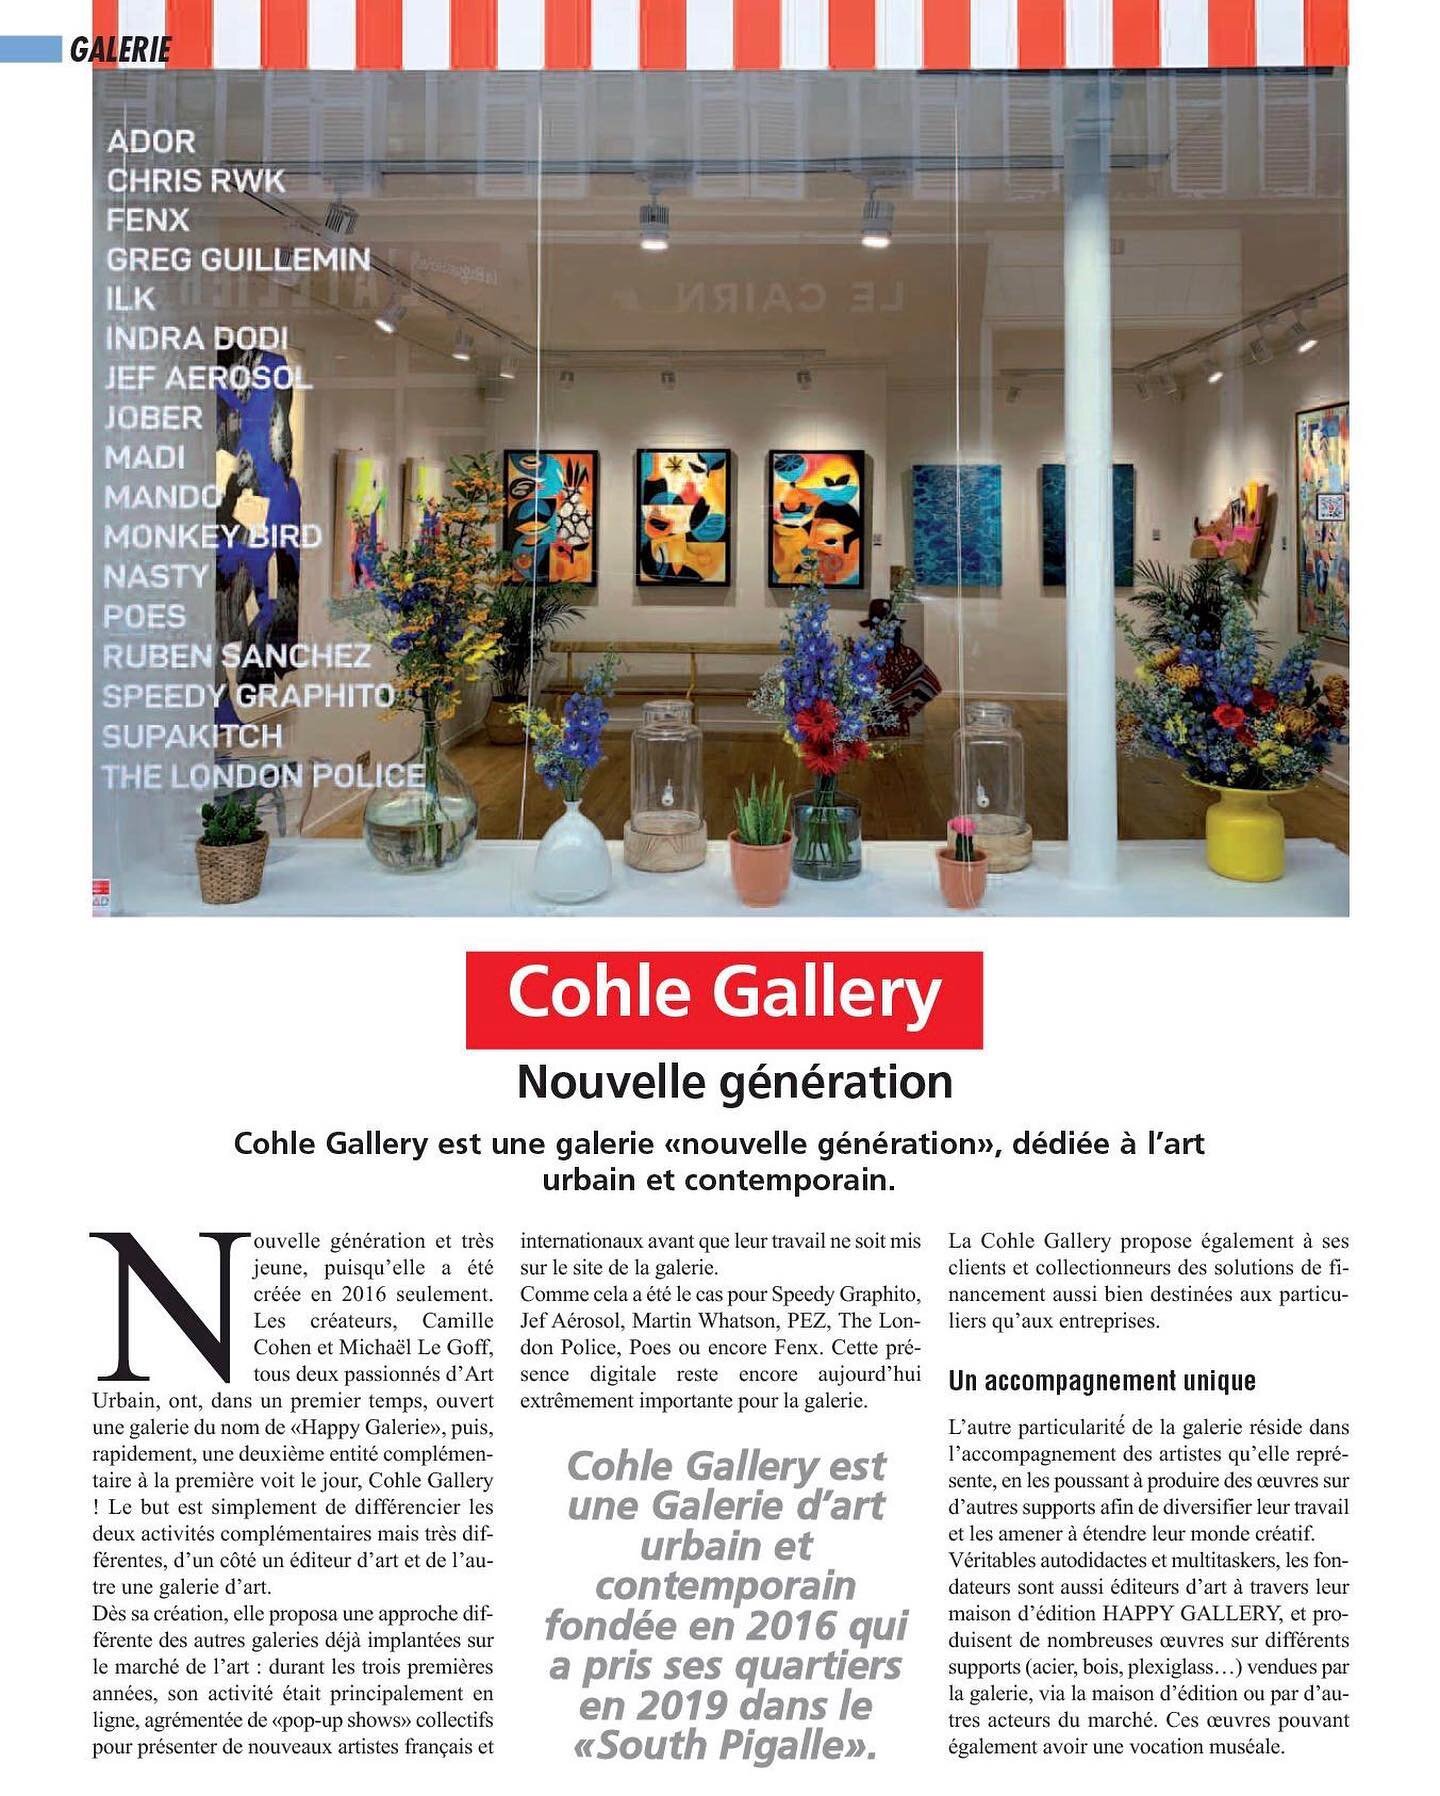 @cohlegallery, the rising gallery of urban and contemporary art, in the &laquo;&nbsp;South Pigalle&nbsp;&raquo;, in the last issue of Le Magazine des Arts 🔥